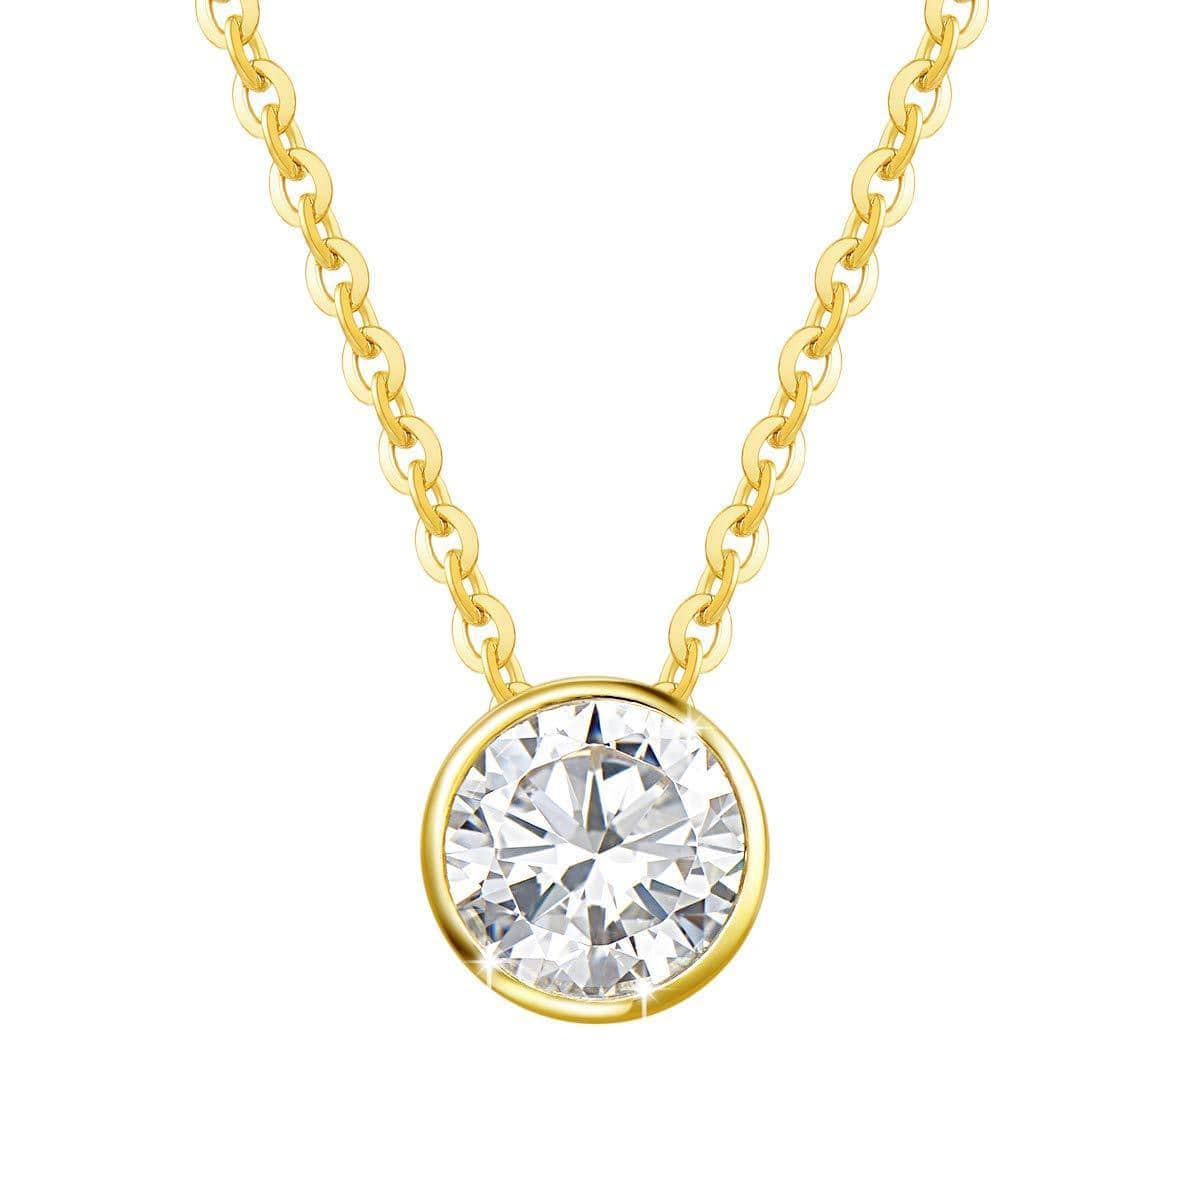 1ct moissanite colorless pendant necklace in 14k yellow gold